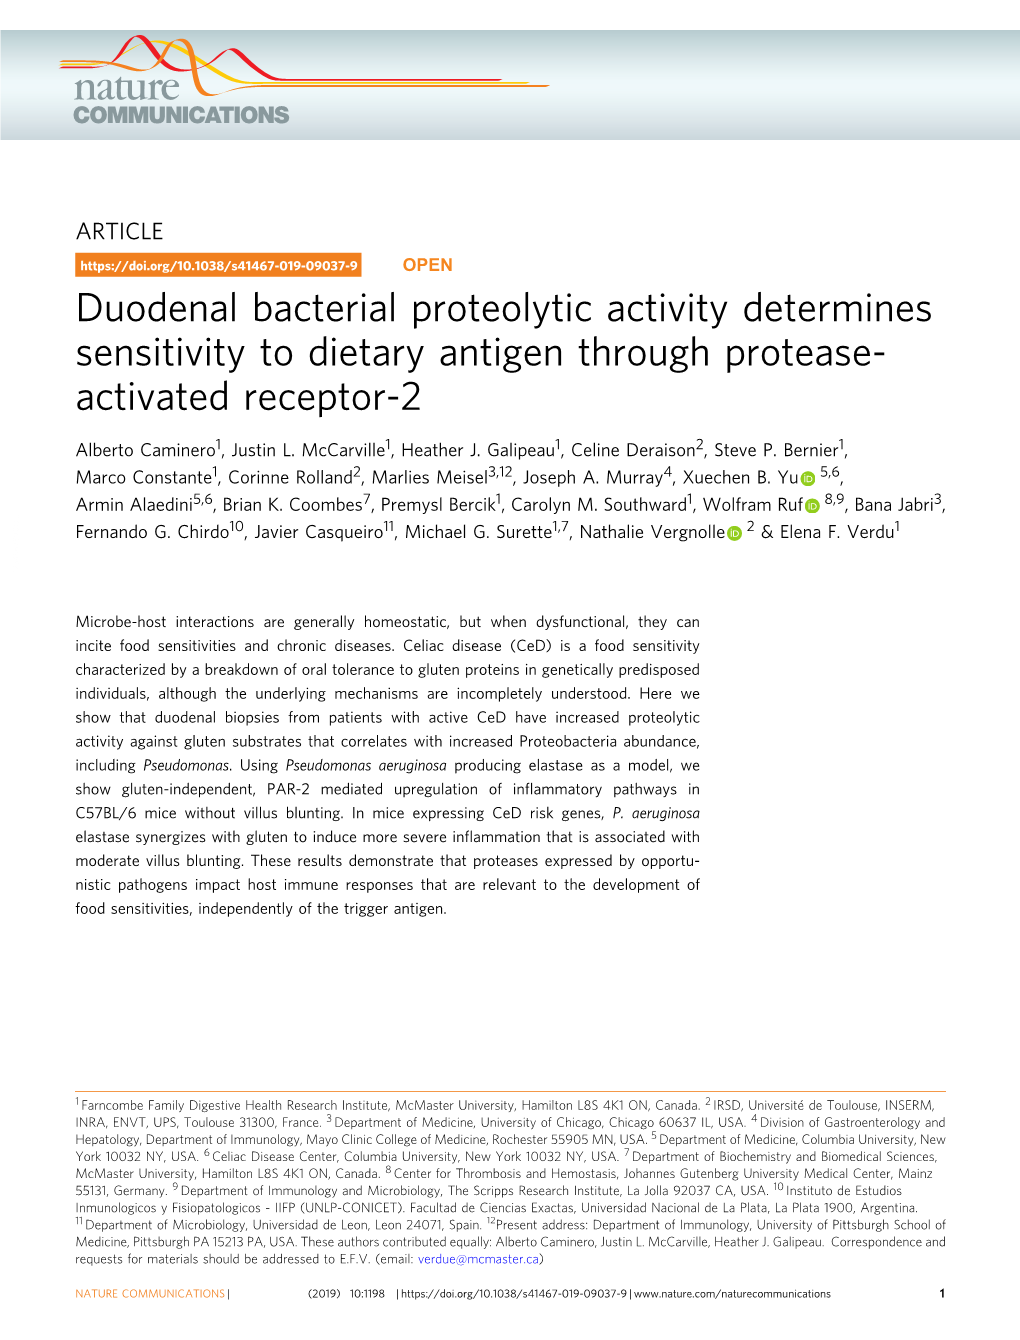 Duodenal Bacterial Proteolytic Activity Determines Sensitivity to Dietary Antigen Through Protease- Activated Receptor-2